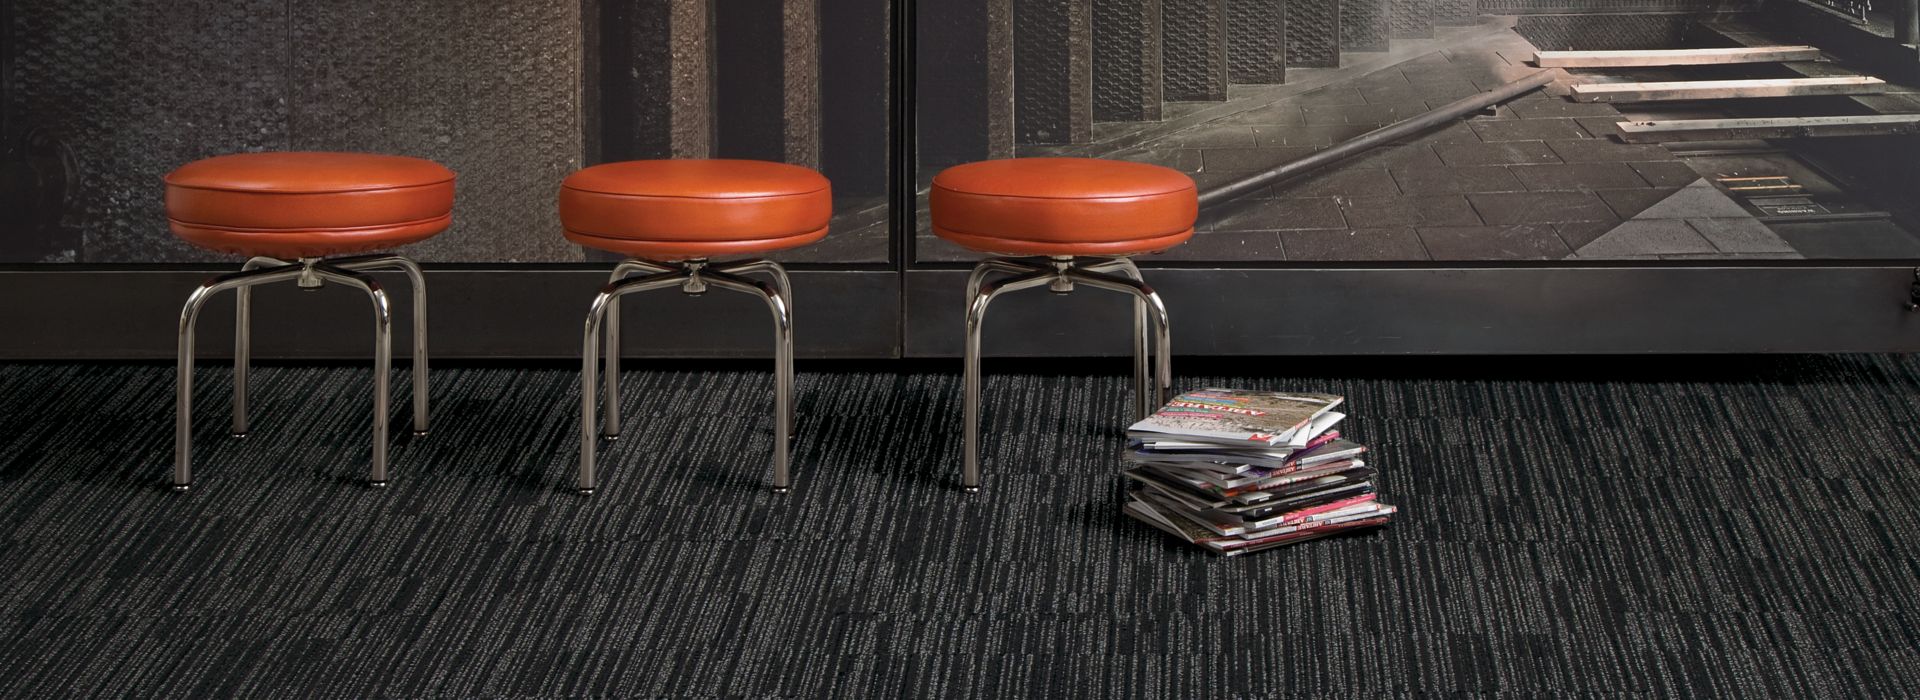 Interface CT102 carpet tile in open area with three red stools and stack of books imagen número 1